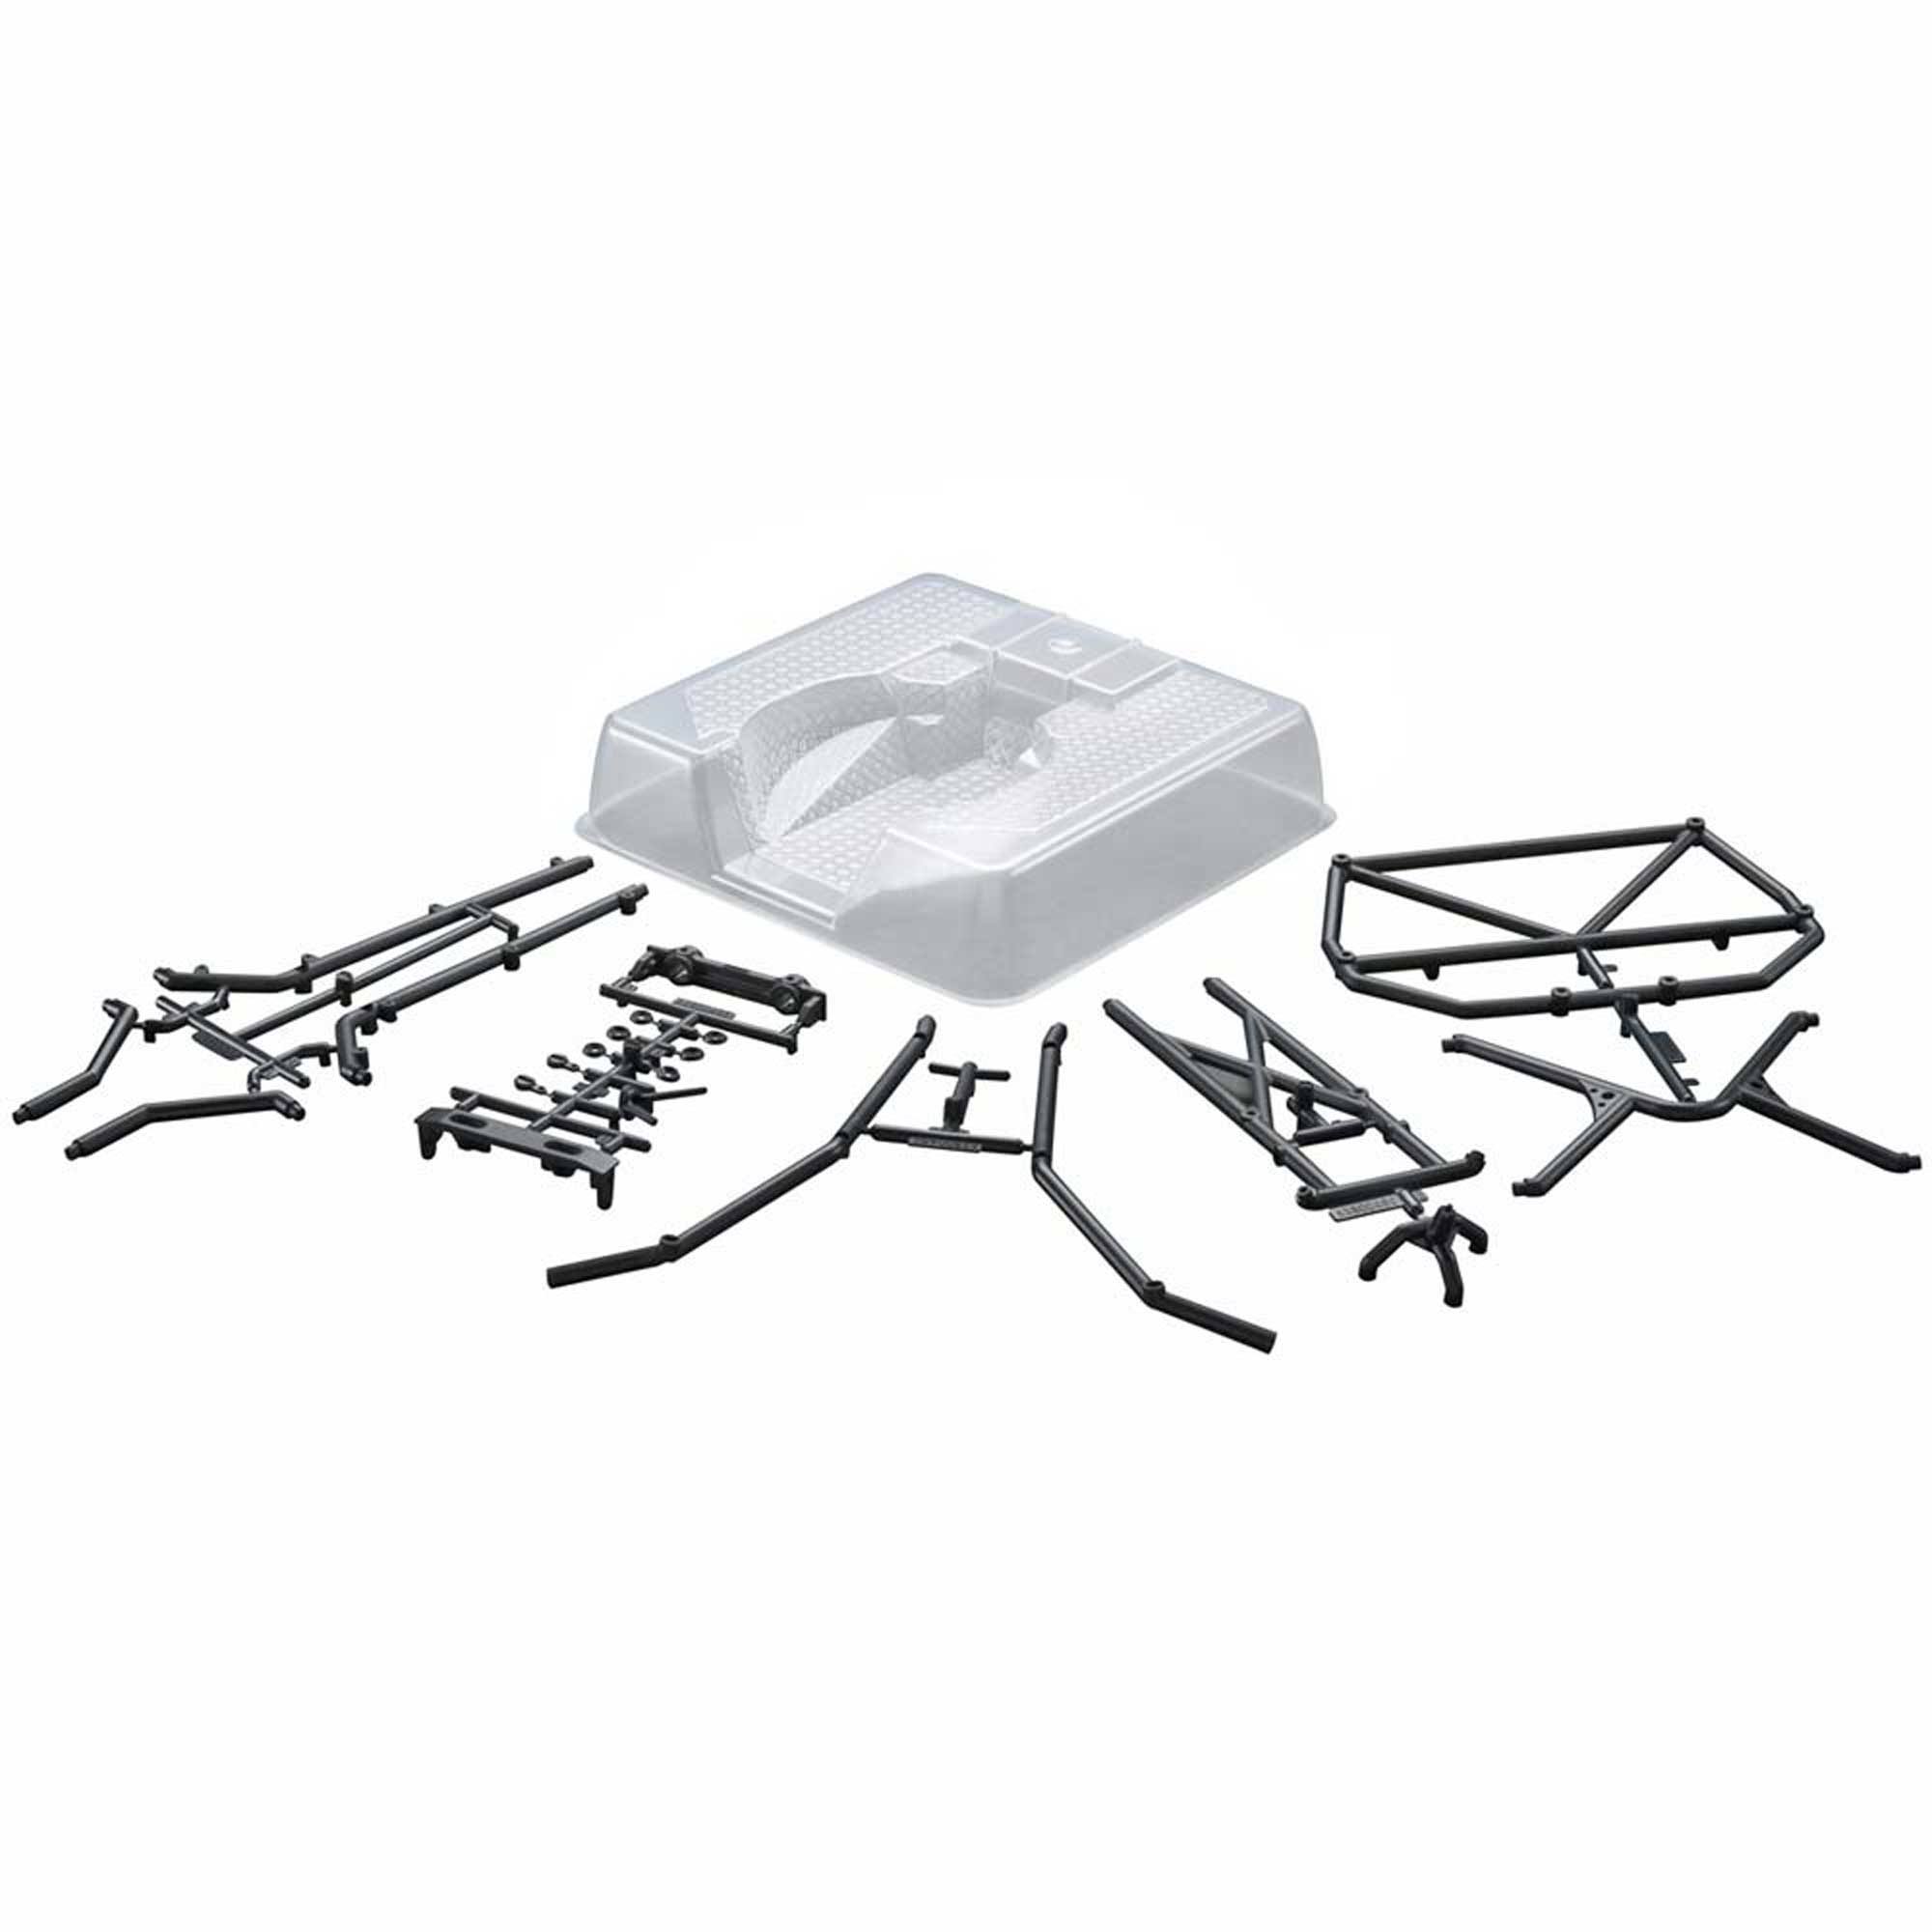 Axial Scx10 Roll Cage Flat Bed Set